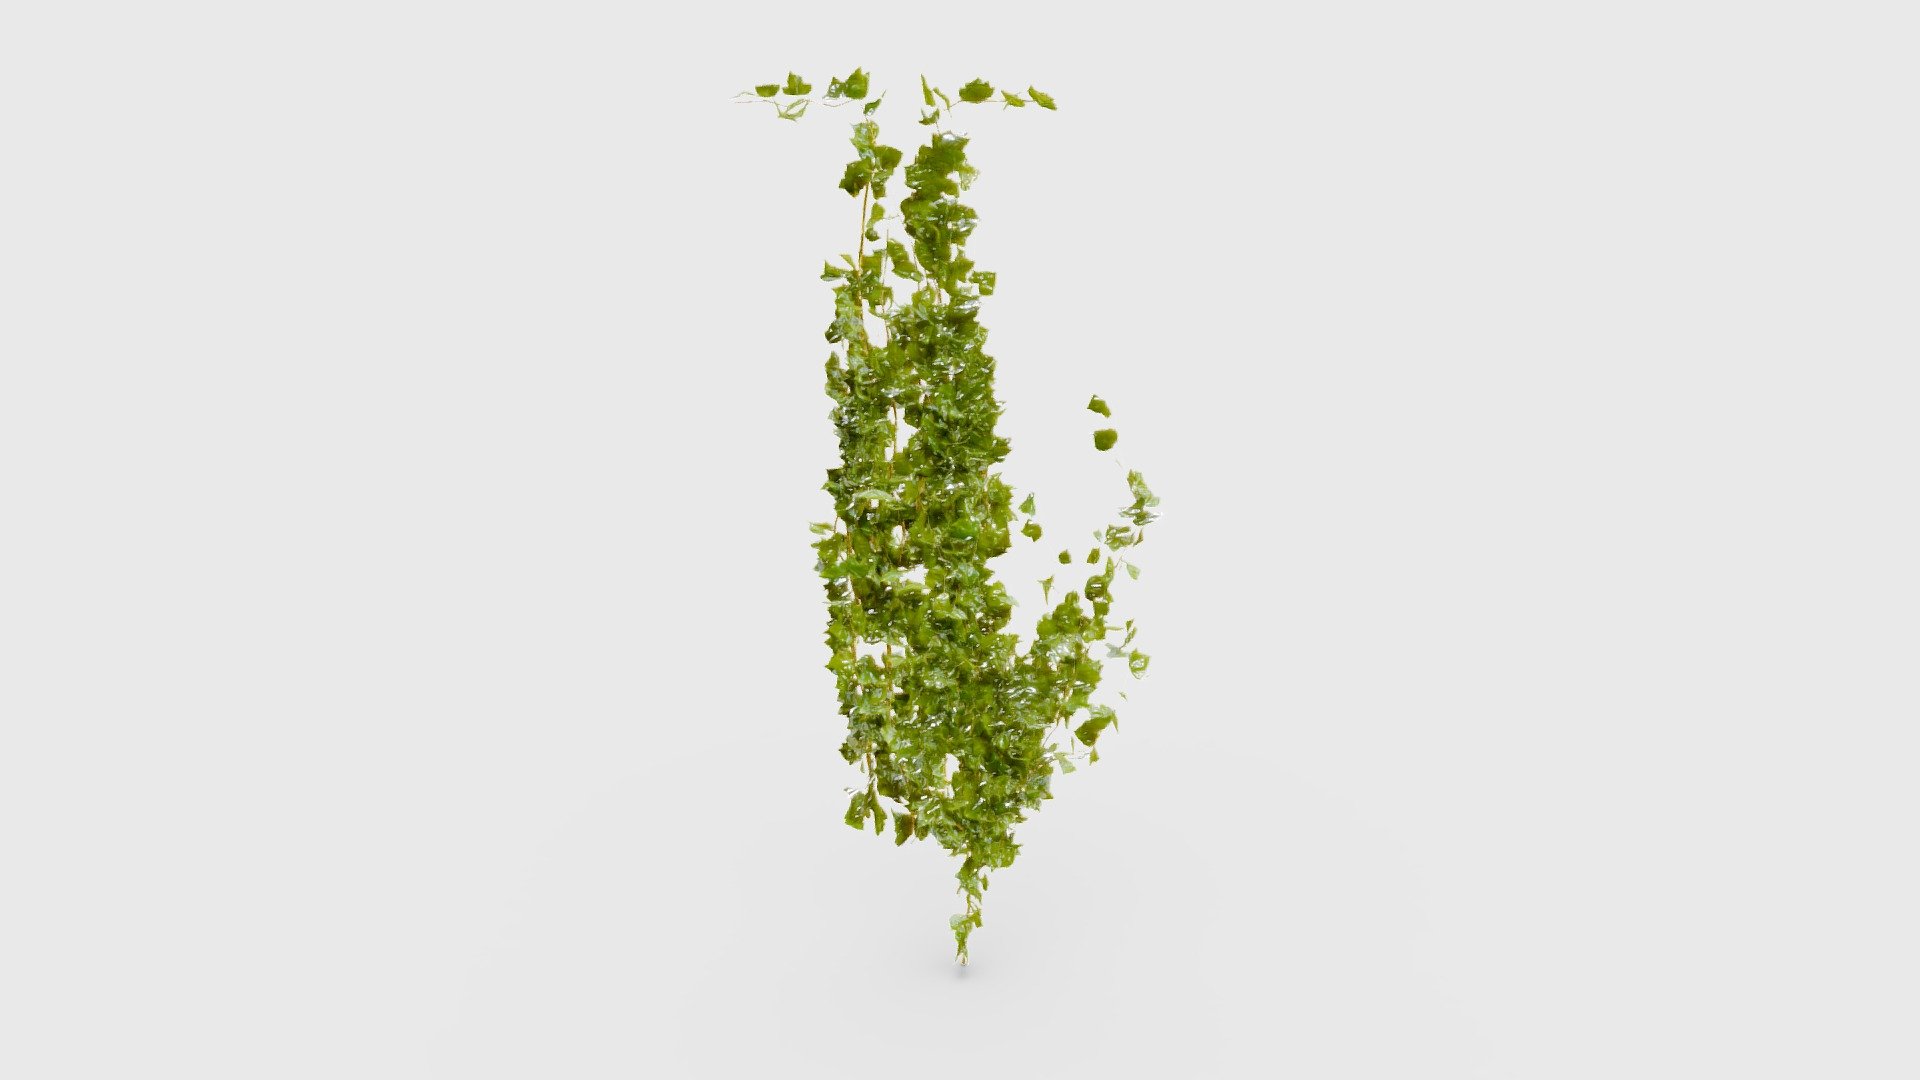 Check out my website for more products and better deals! &amp;gt;&amp;gt; SM5 by Heledahn &amp;lt;&amp;lt;


This is a digital 3d model of a creeping ivy plant that grows on a wall. The leaves have a material setup that changes the texture depending on the face orientation, allowing for a highly realistic plant with double-sided leaves. 

(8K TEXTURES AND DOUBLE-SIDED LEAVE MATERIAL ONLY FOR SALE IN MY WEBSITE 🔼).

This model can be used for any Outdoor themed render project, used either as a background prop, or as a closeup prop due to its high detail and visual quality.

This product will achieve realistic results in your rendering projects and animations, being greatly suited for close-ups due to their high quality topology and PBR shading 3d model